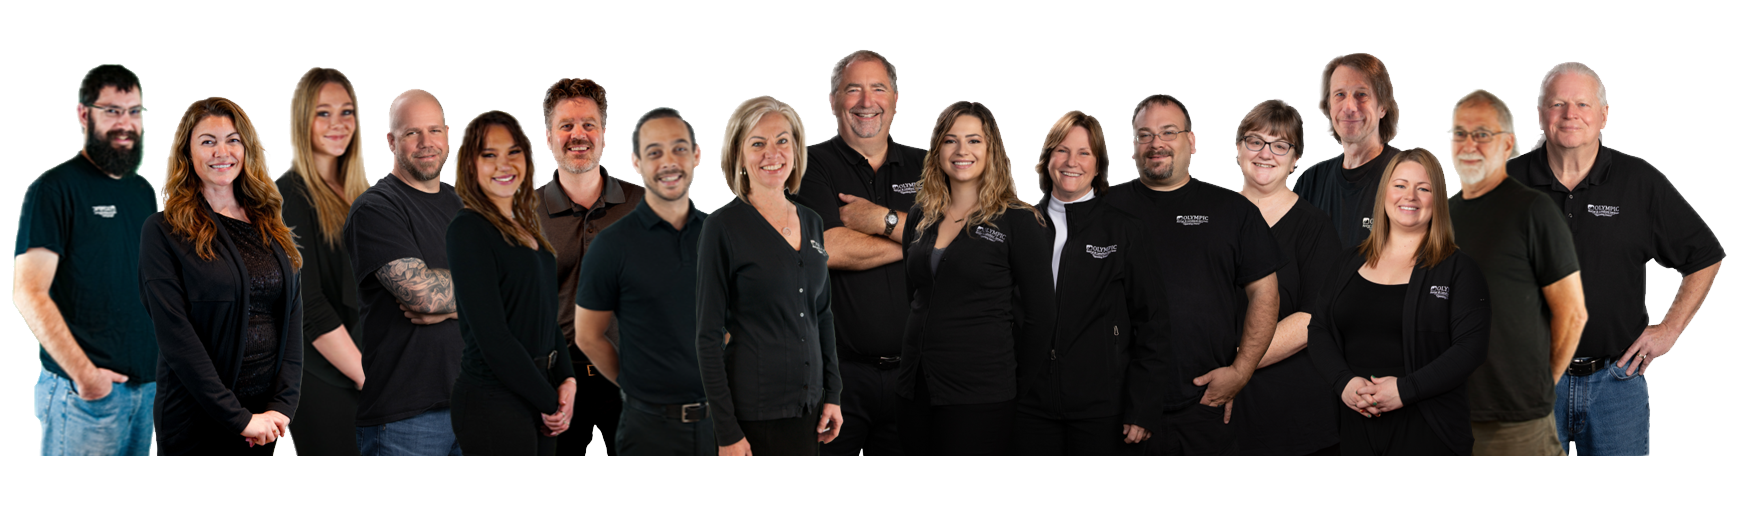 Olympic Rental And Landlord Services Team